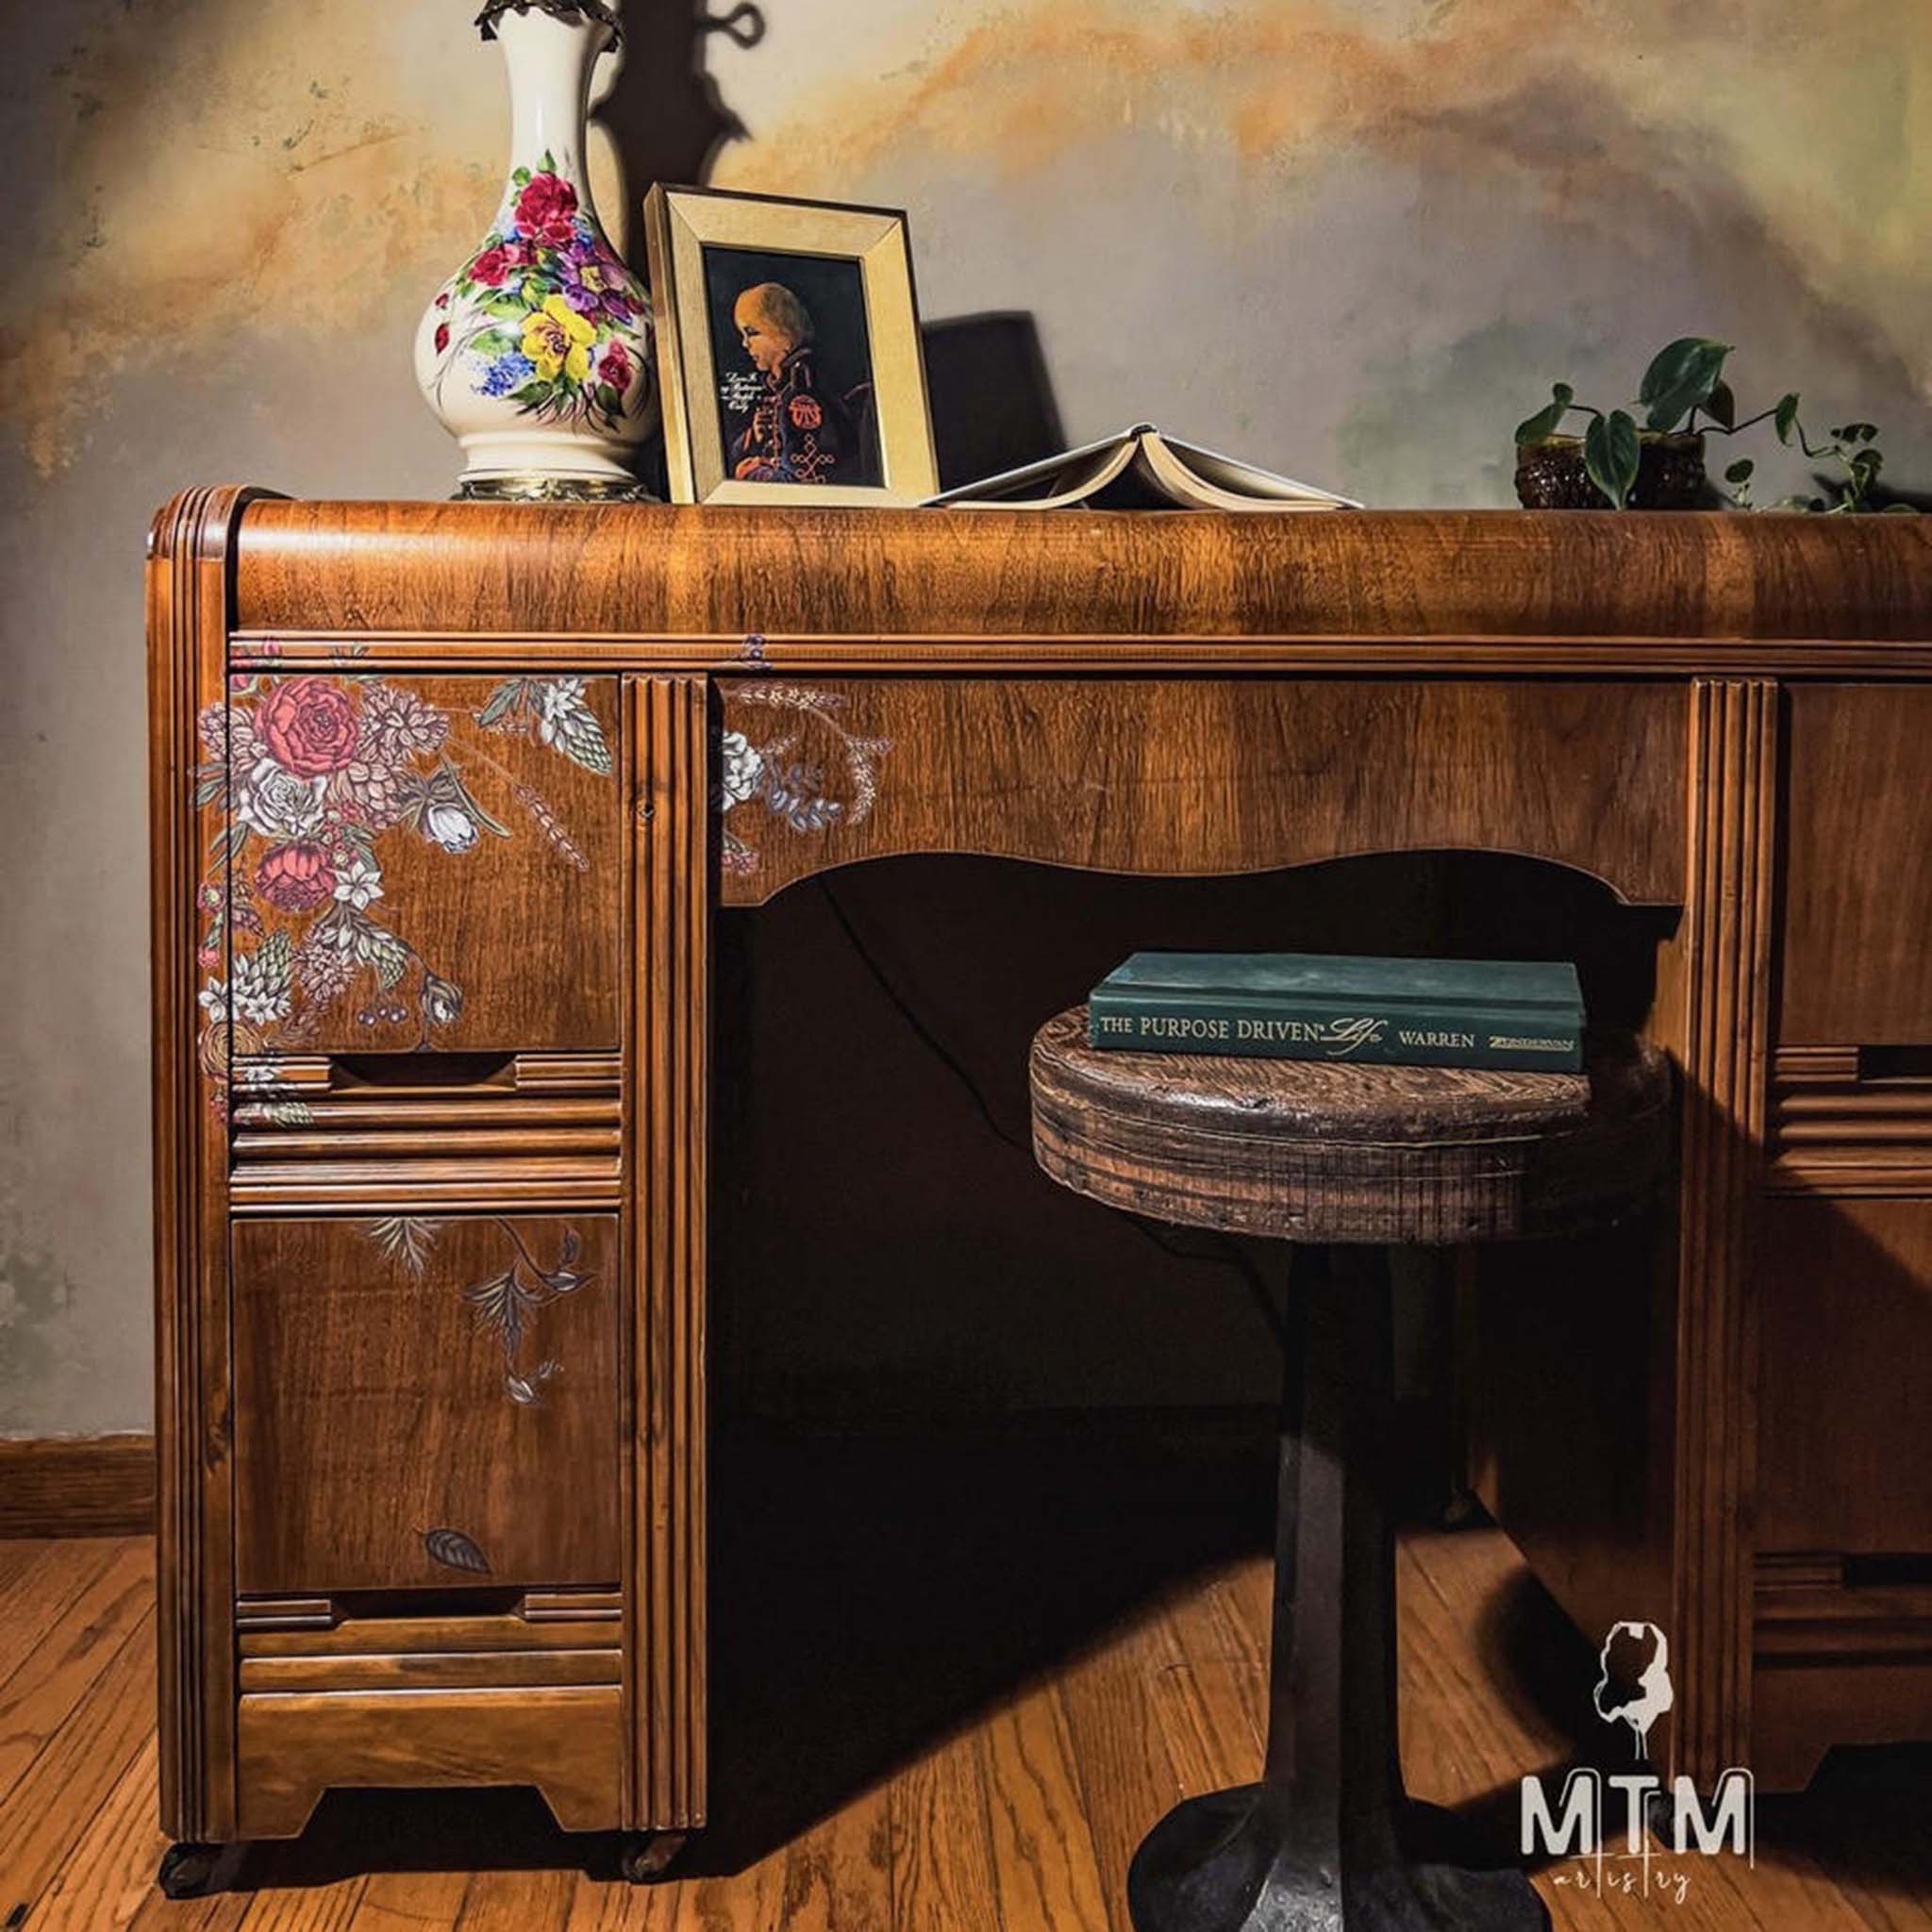 A vintage waterfall desk refurbished by MTM Artistry features Belles & Whistles' Timeless Petals transfer on one of its drawers.